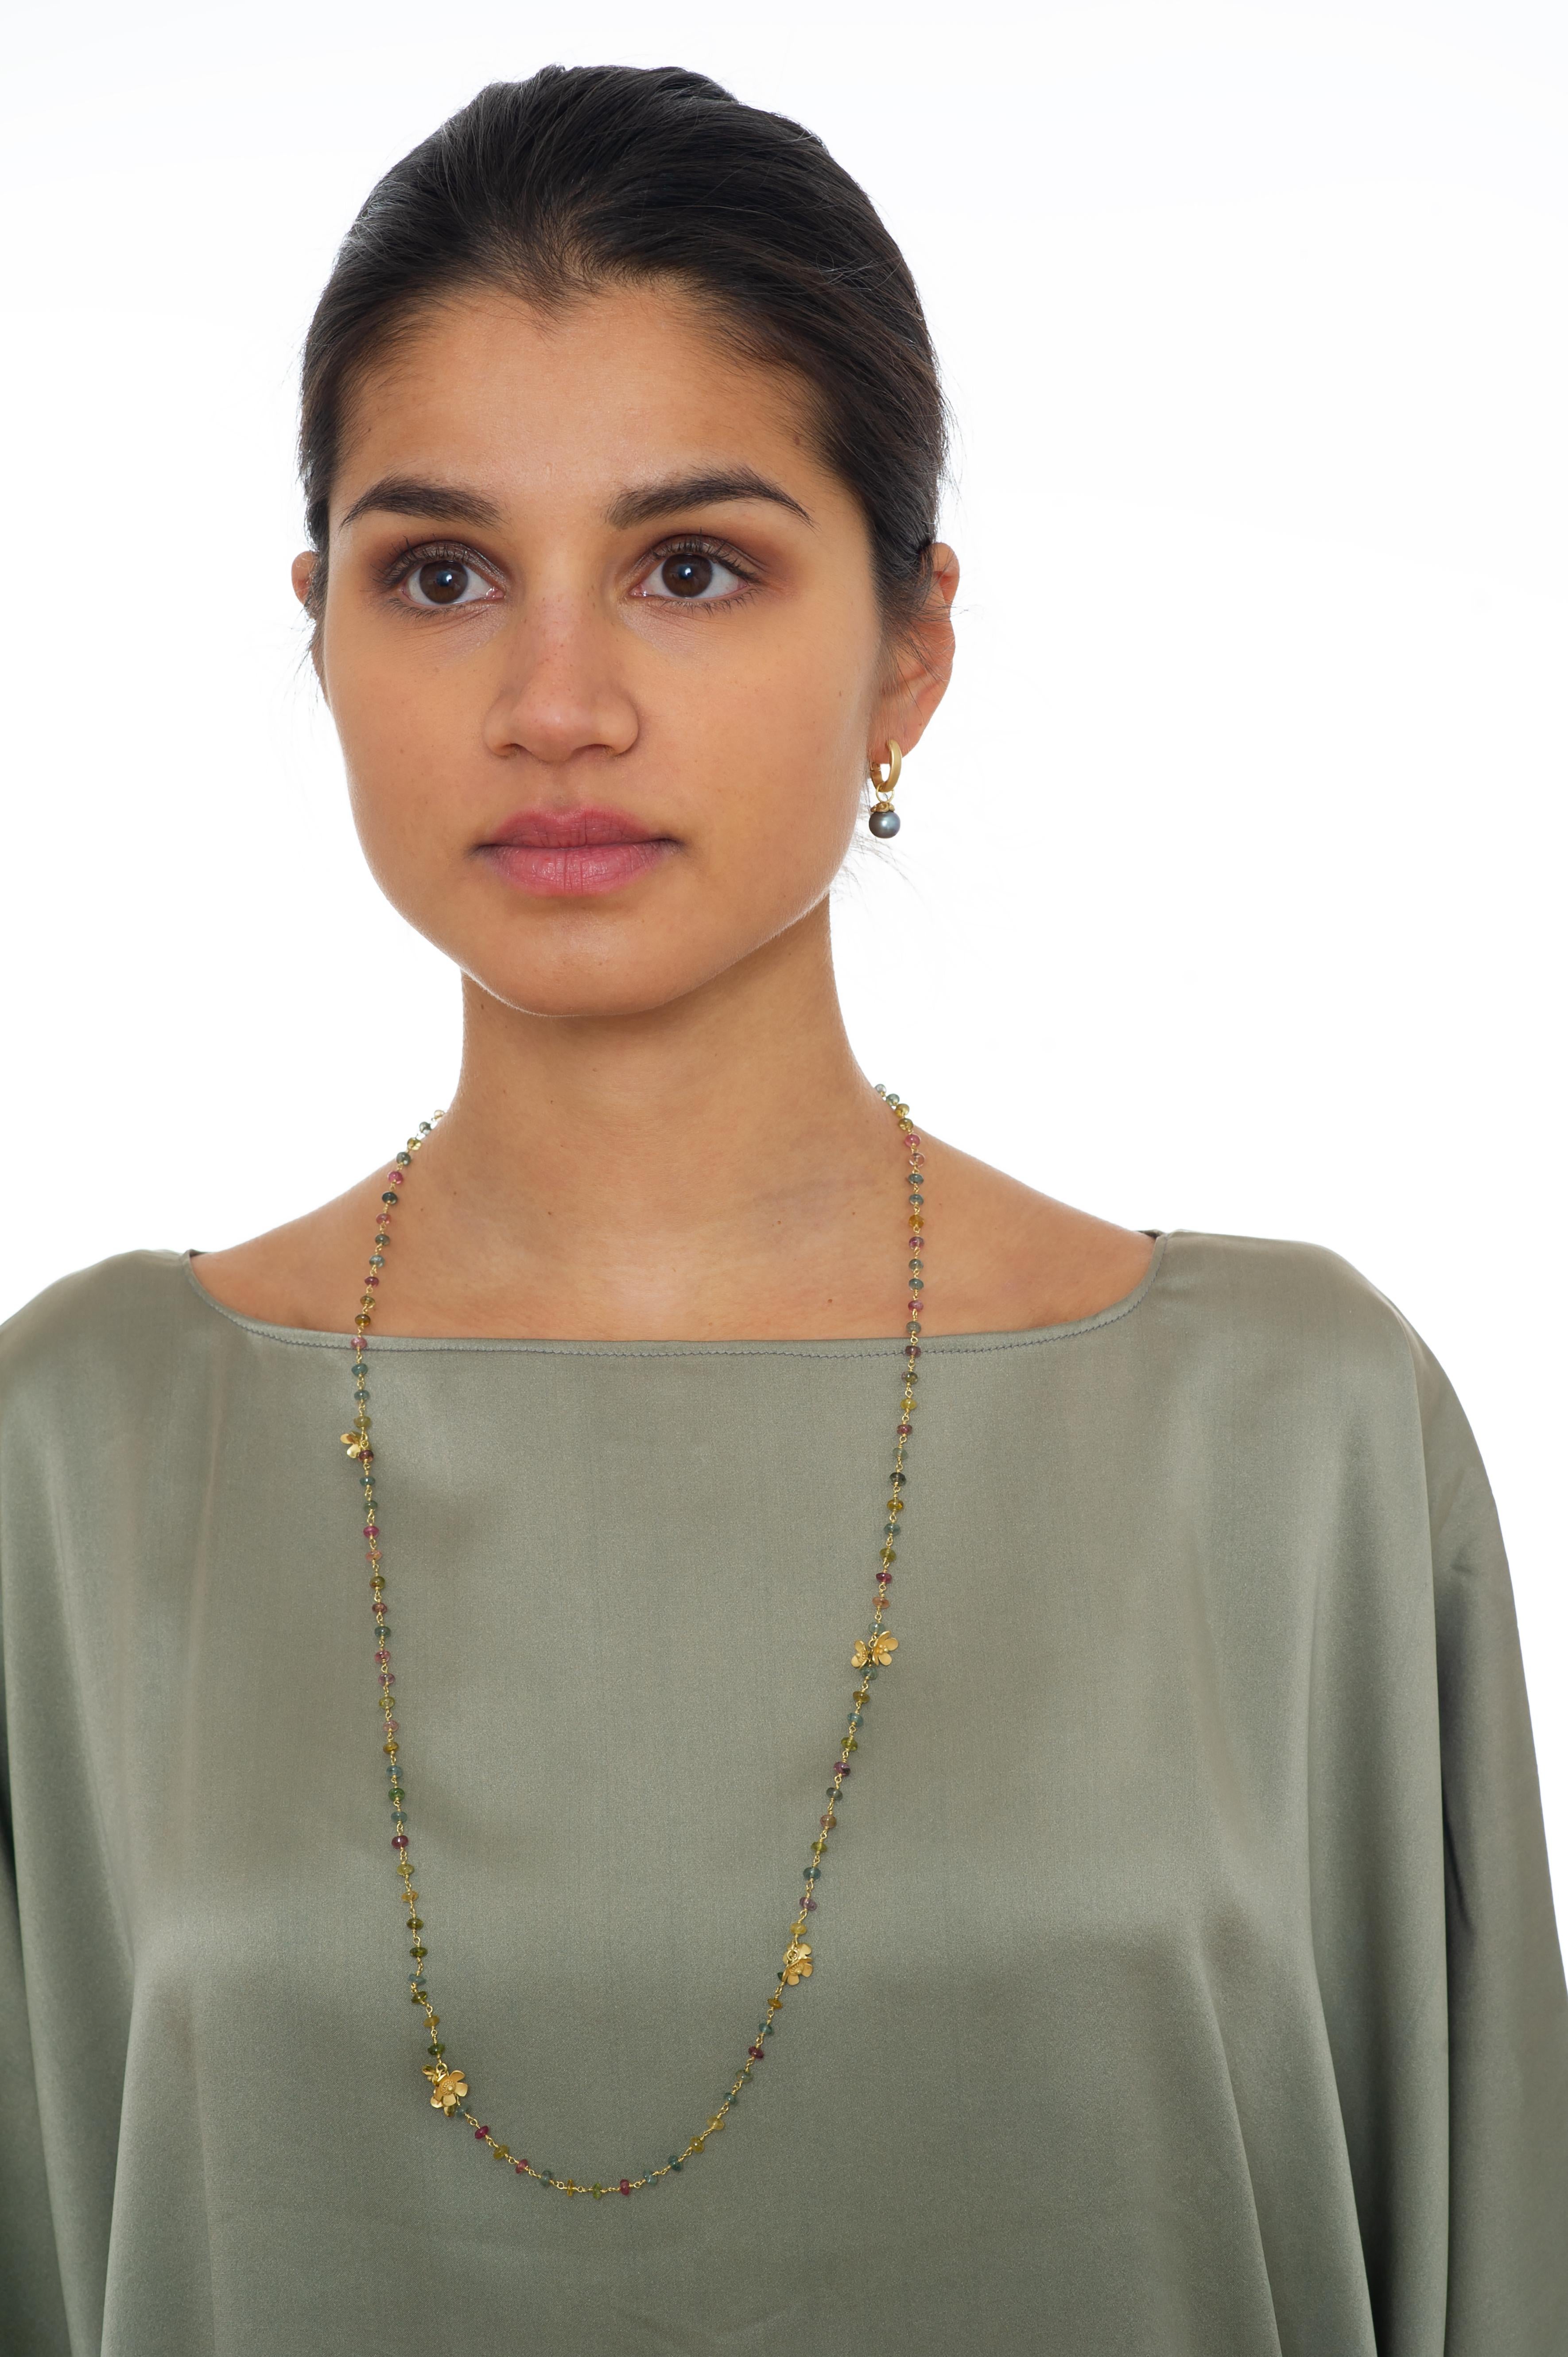 This handcrafted one-of-a-kind necklace is the epitome of elegance. Crystal clear multi-colour tourmaline beads in soft pastel are wire-wrapped on 18k yellow gold wire interspaced with hand-made delicate little gold flowers. Wear this light-weight